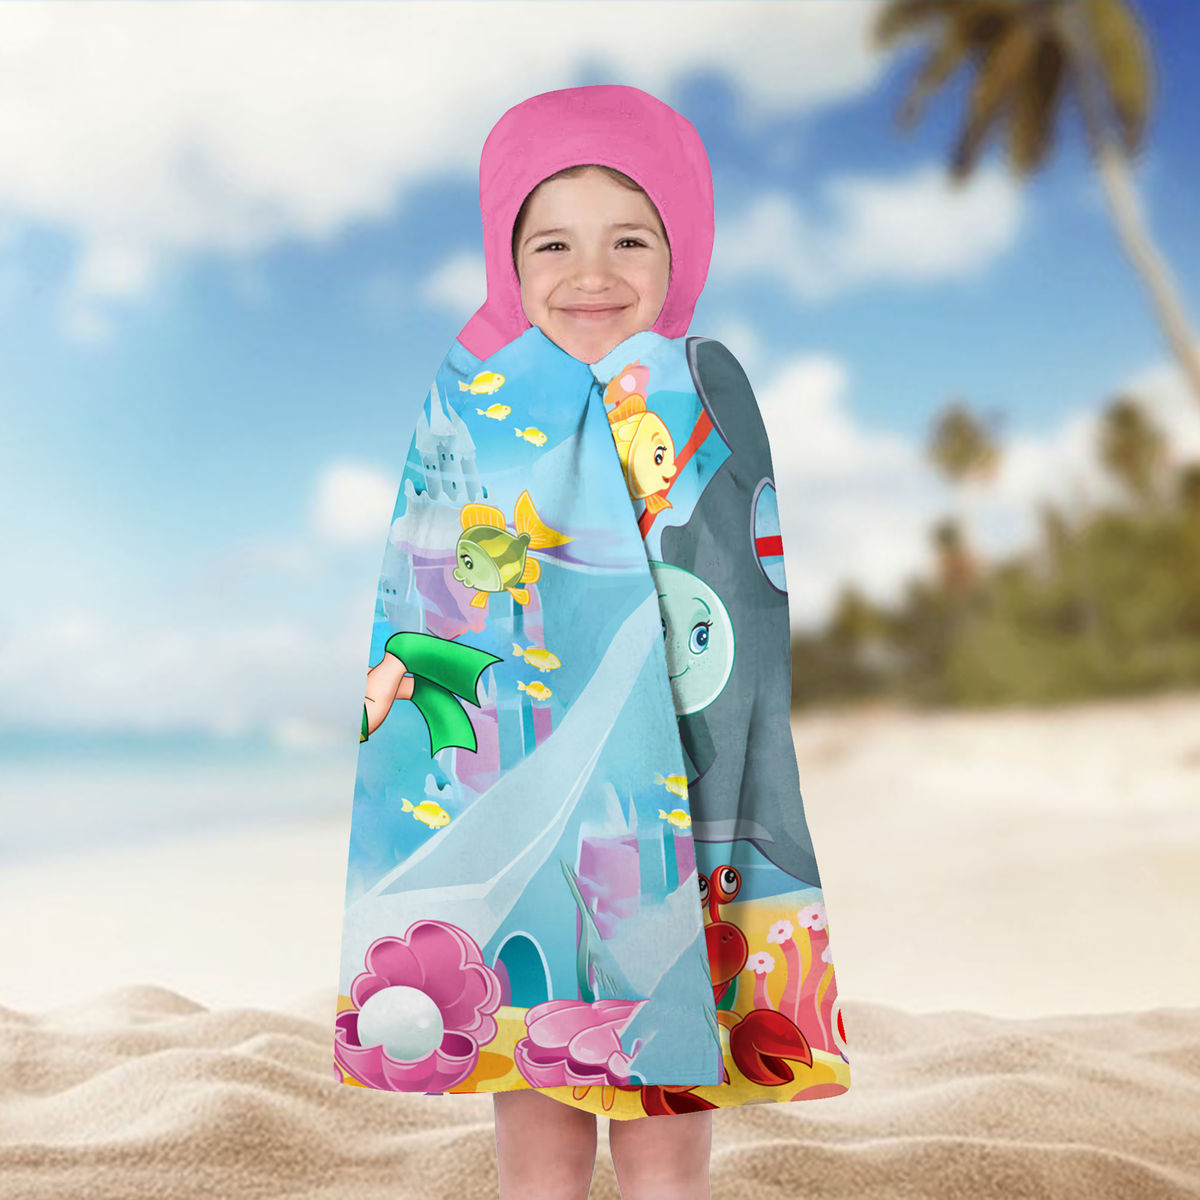 Hooded Towel - Beach Bath Towel with Hood For Kids - Custom Diver For Boy - Birthday Gifts for Toddler, Gifts For Kids - Personalized Towel_3